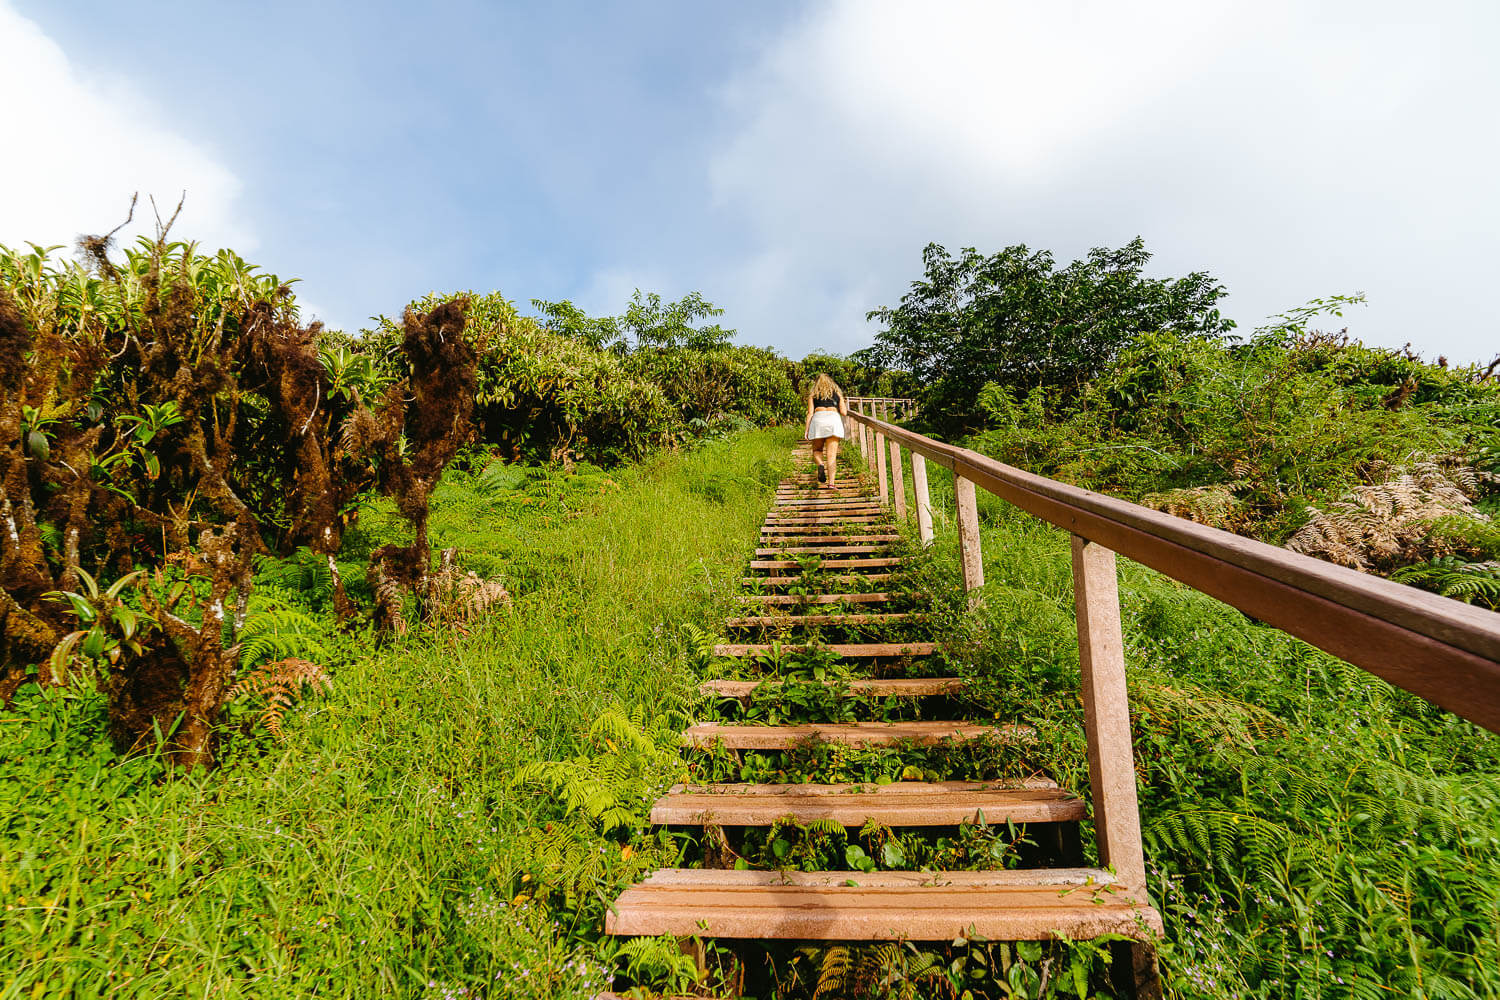 The wooden stairs before arriving at the crater on the Highlands Tour in San Cristobal